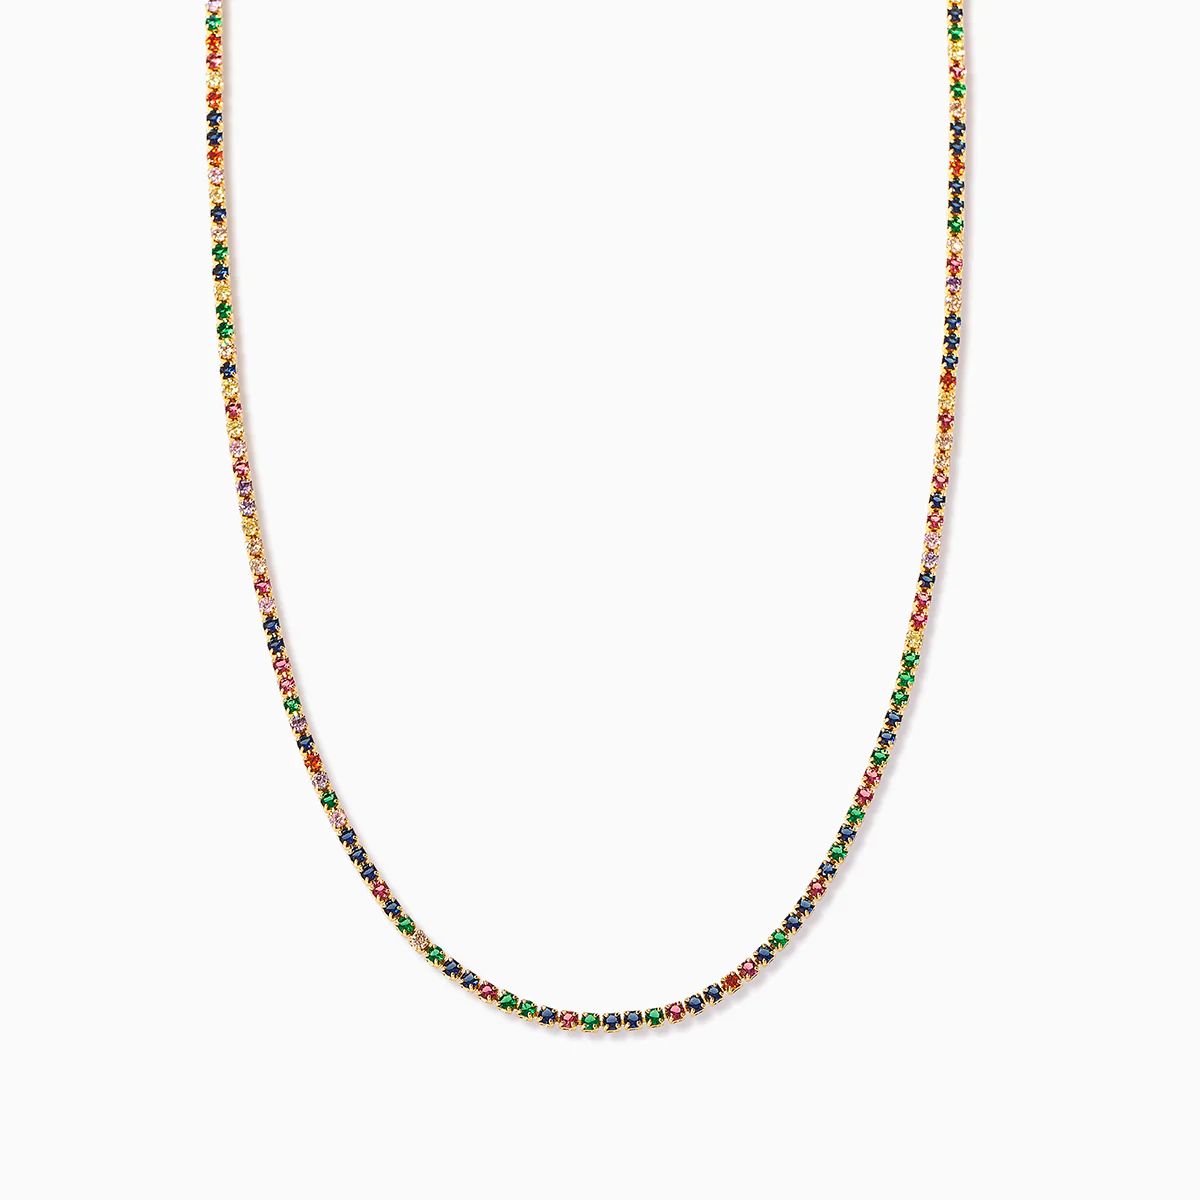 Colorful Studded Necklace | Uncommon James